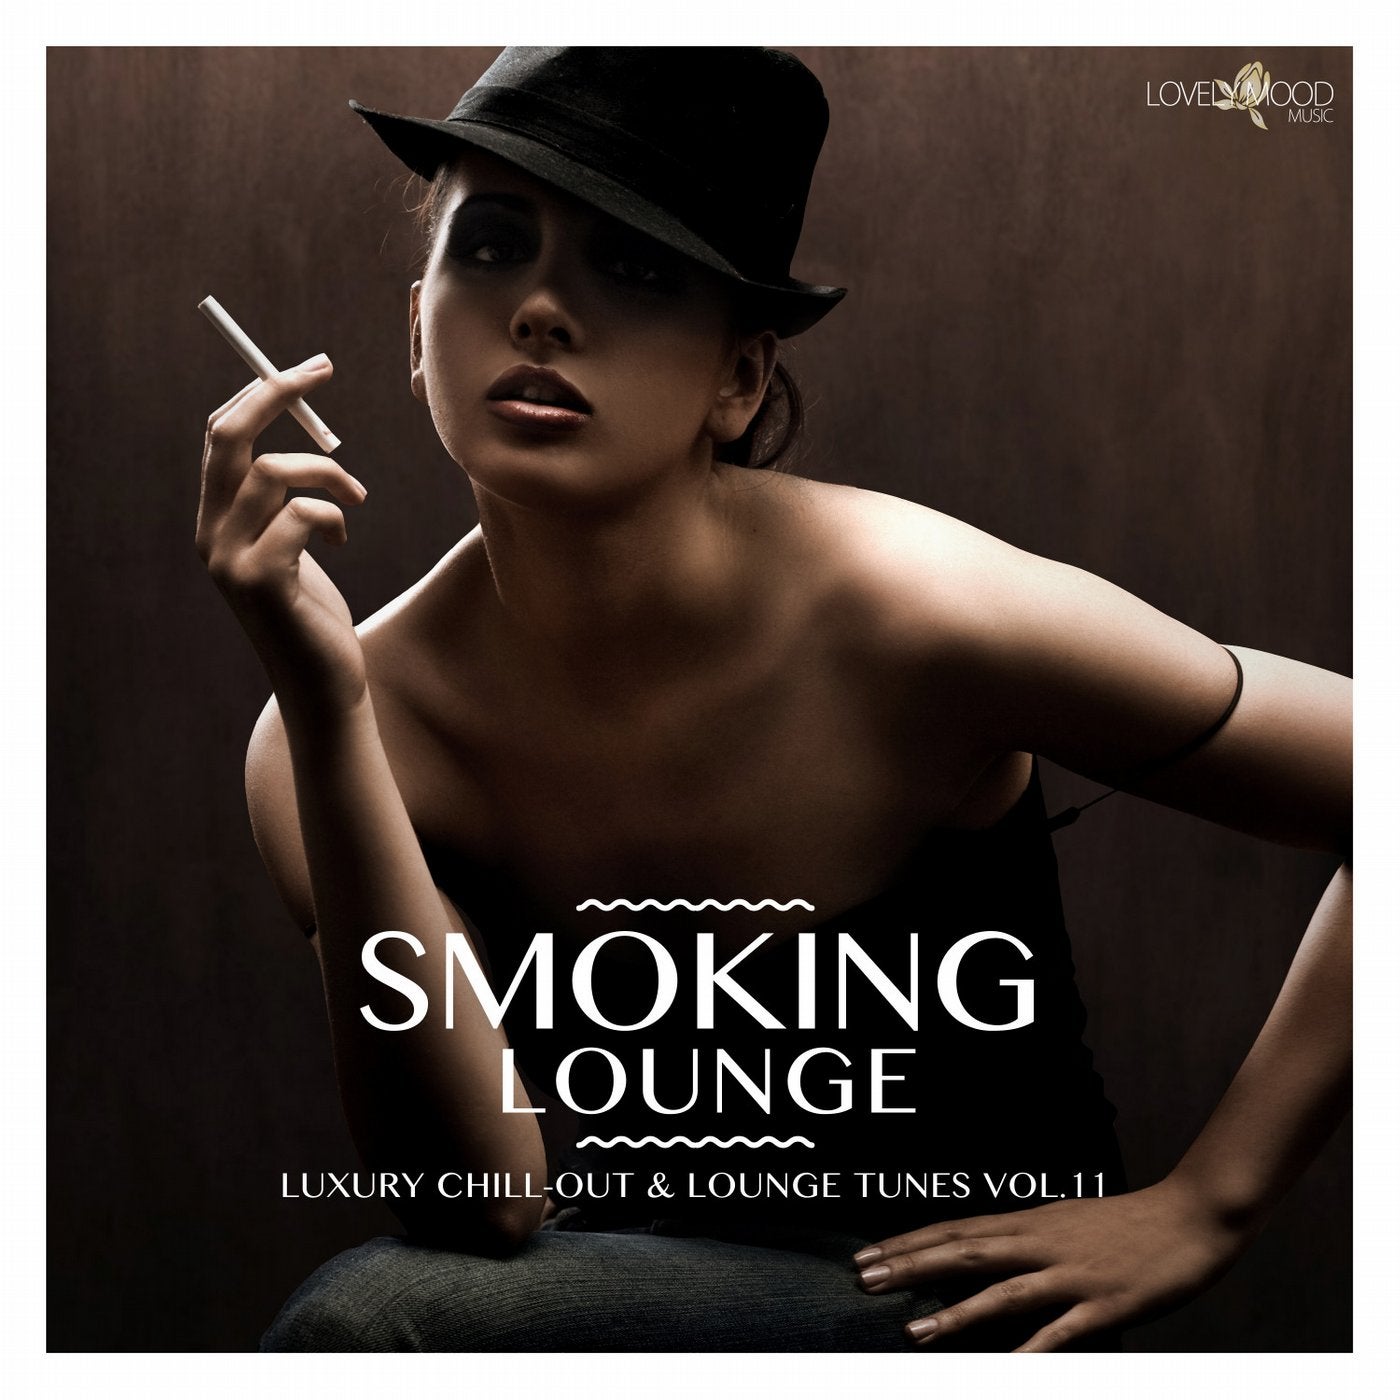 Smoking Lounge - Luxury Chill-Out & Lounge Tunes Vol. 11